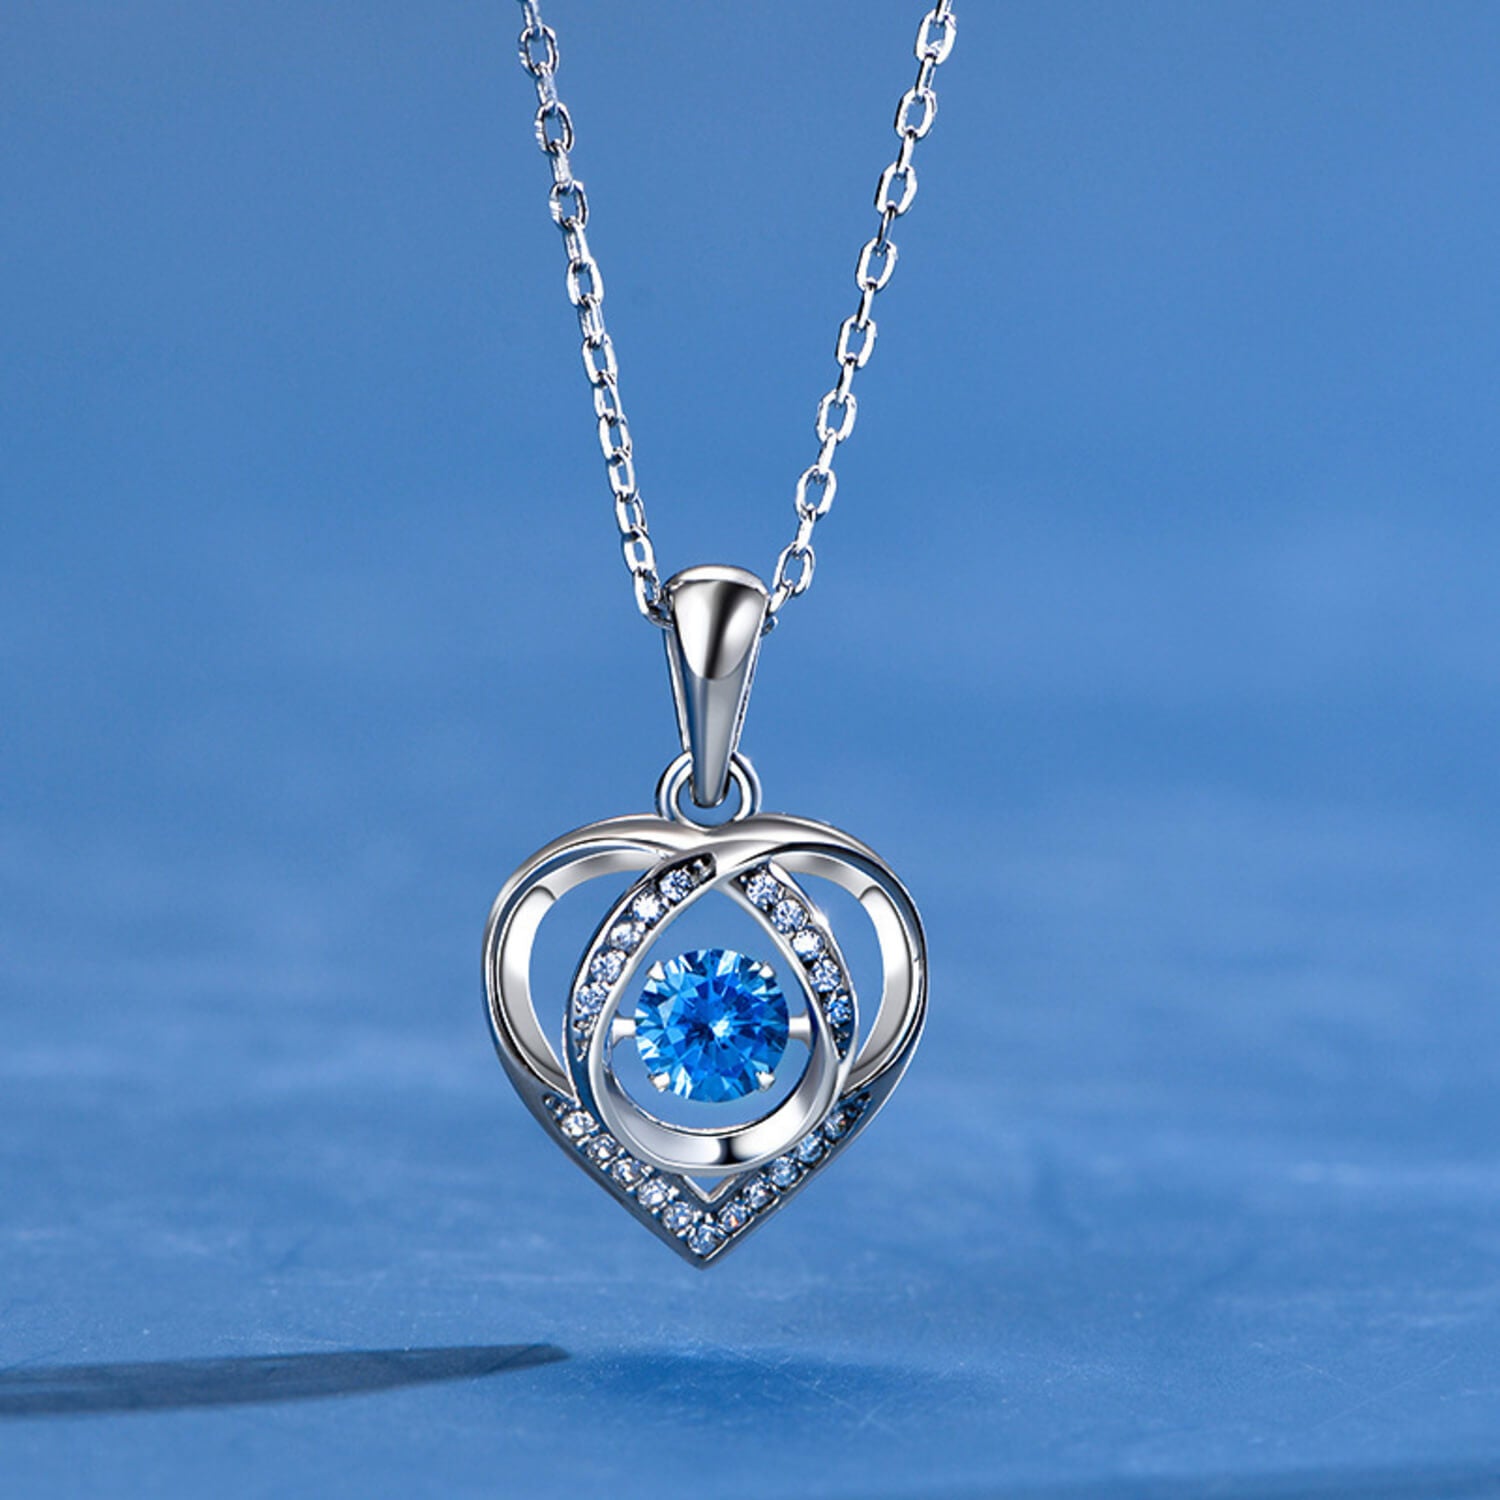 dancing diamond necklace white gold